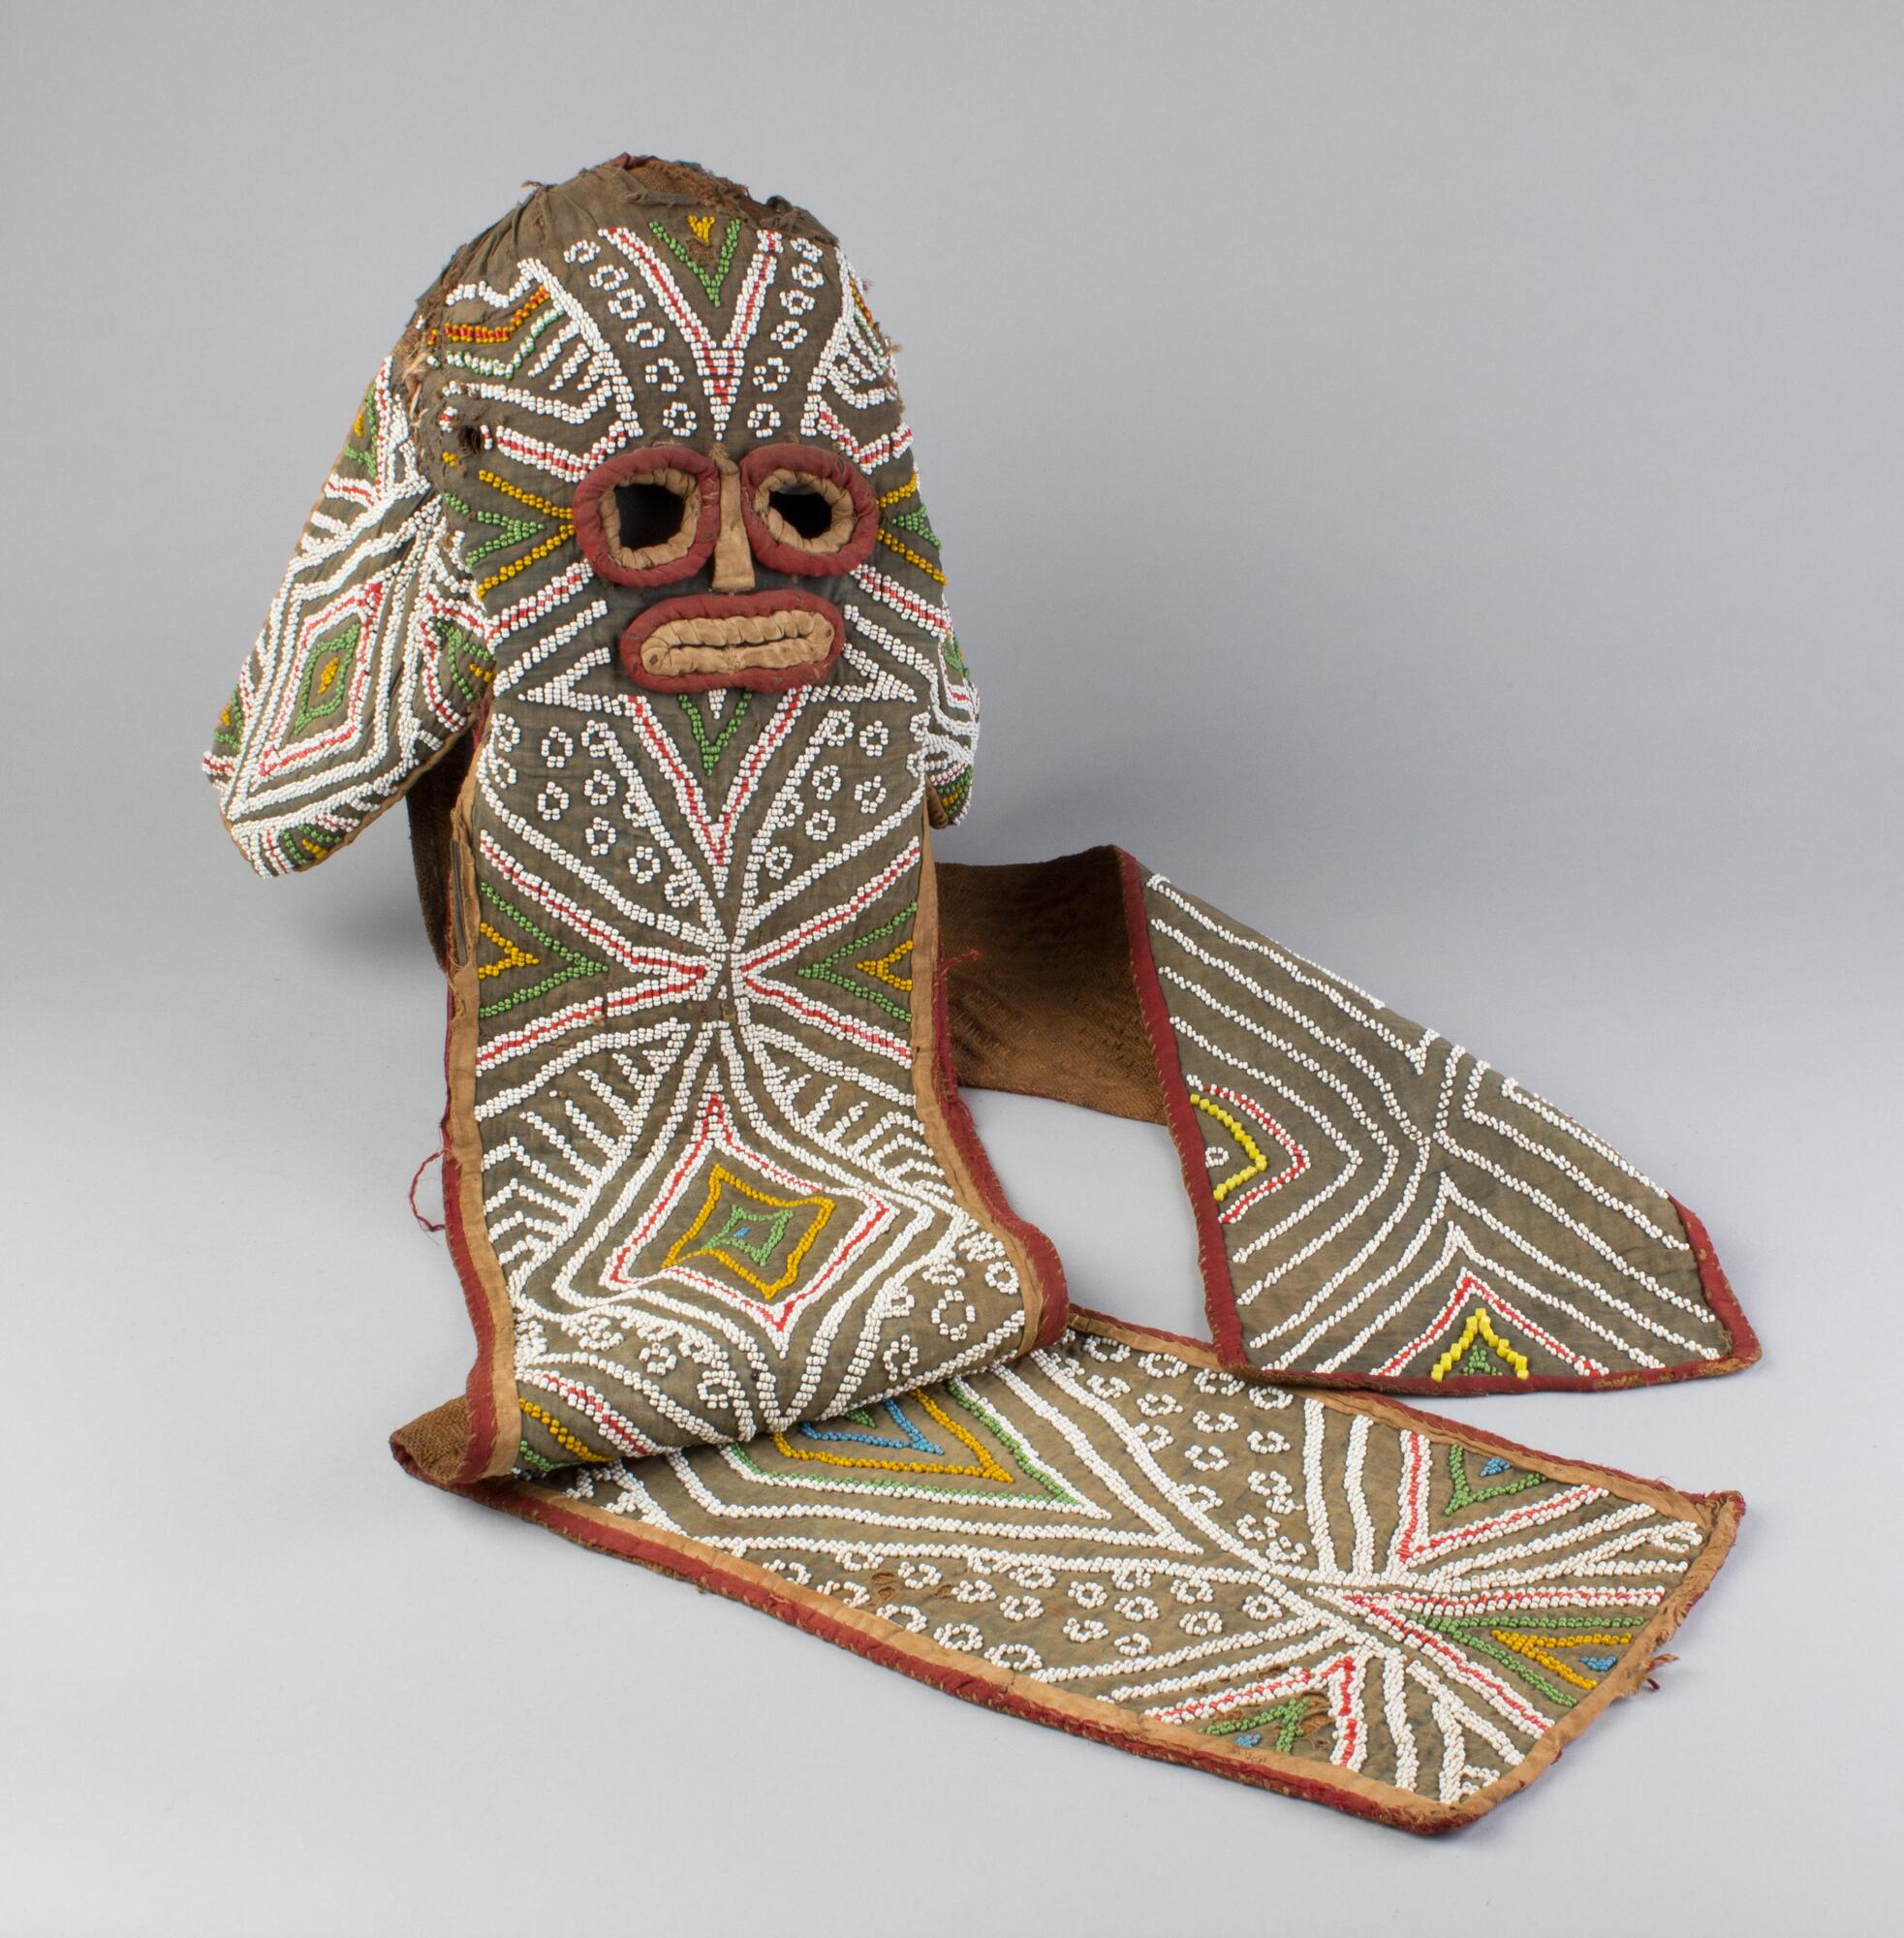 A fabric mask with round eyes and an oblong mouth and nose made from red and yellow bound cloth. The brown base fabric is covered with small beads in a geometric pattern. The majority of the beads are white, with red, yellow, green, and blue beads also used. The edges of the mask are bound in red and tan cloth. 